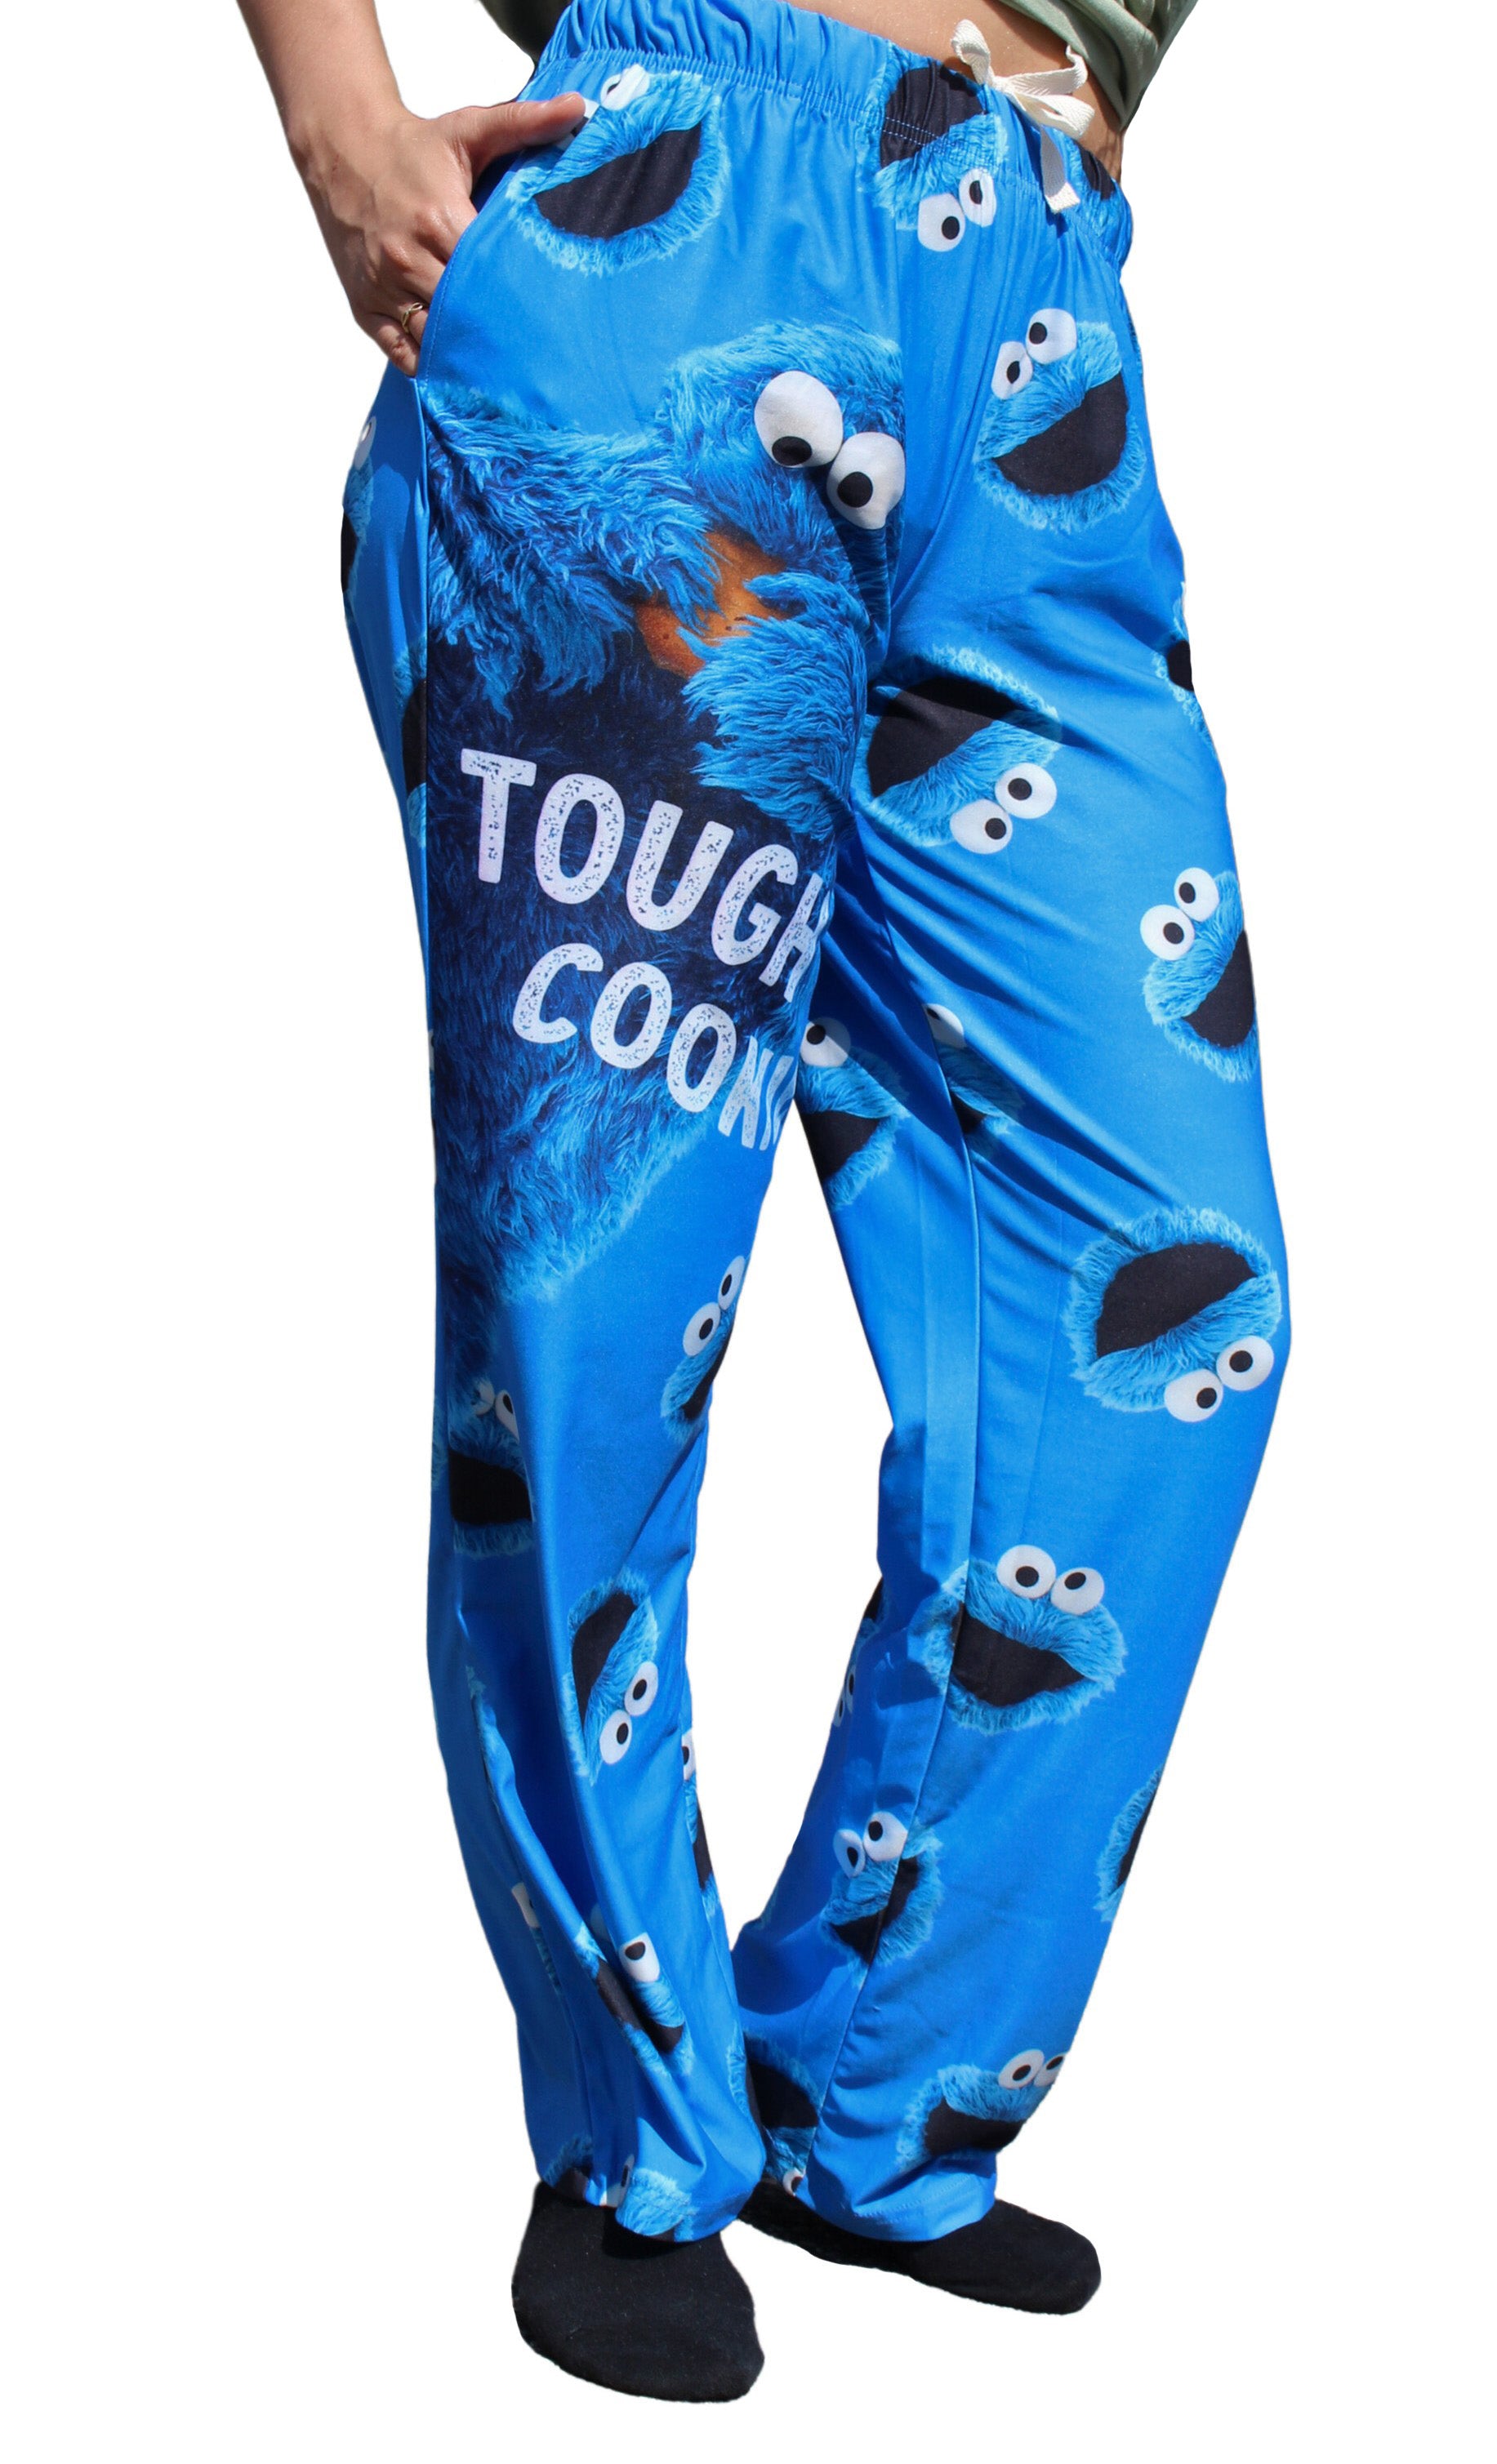 Tough Cookie Pajama Lounge Pants on model right side view (waist down)